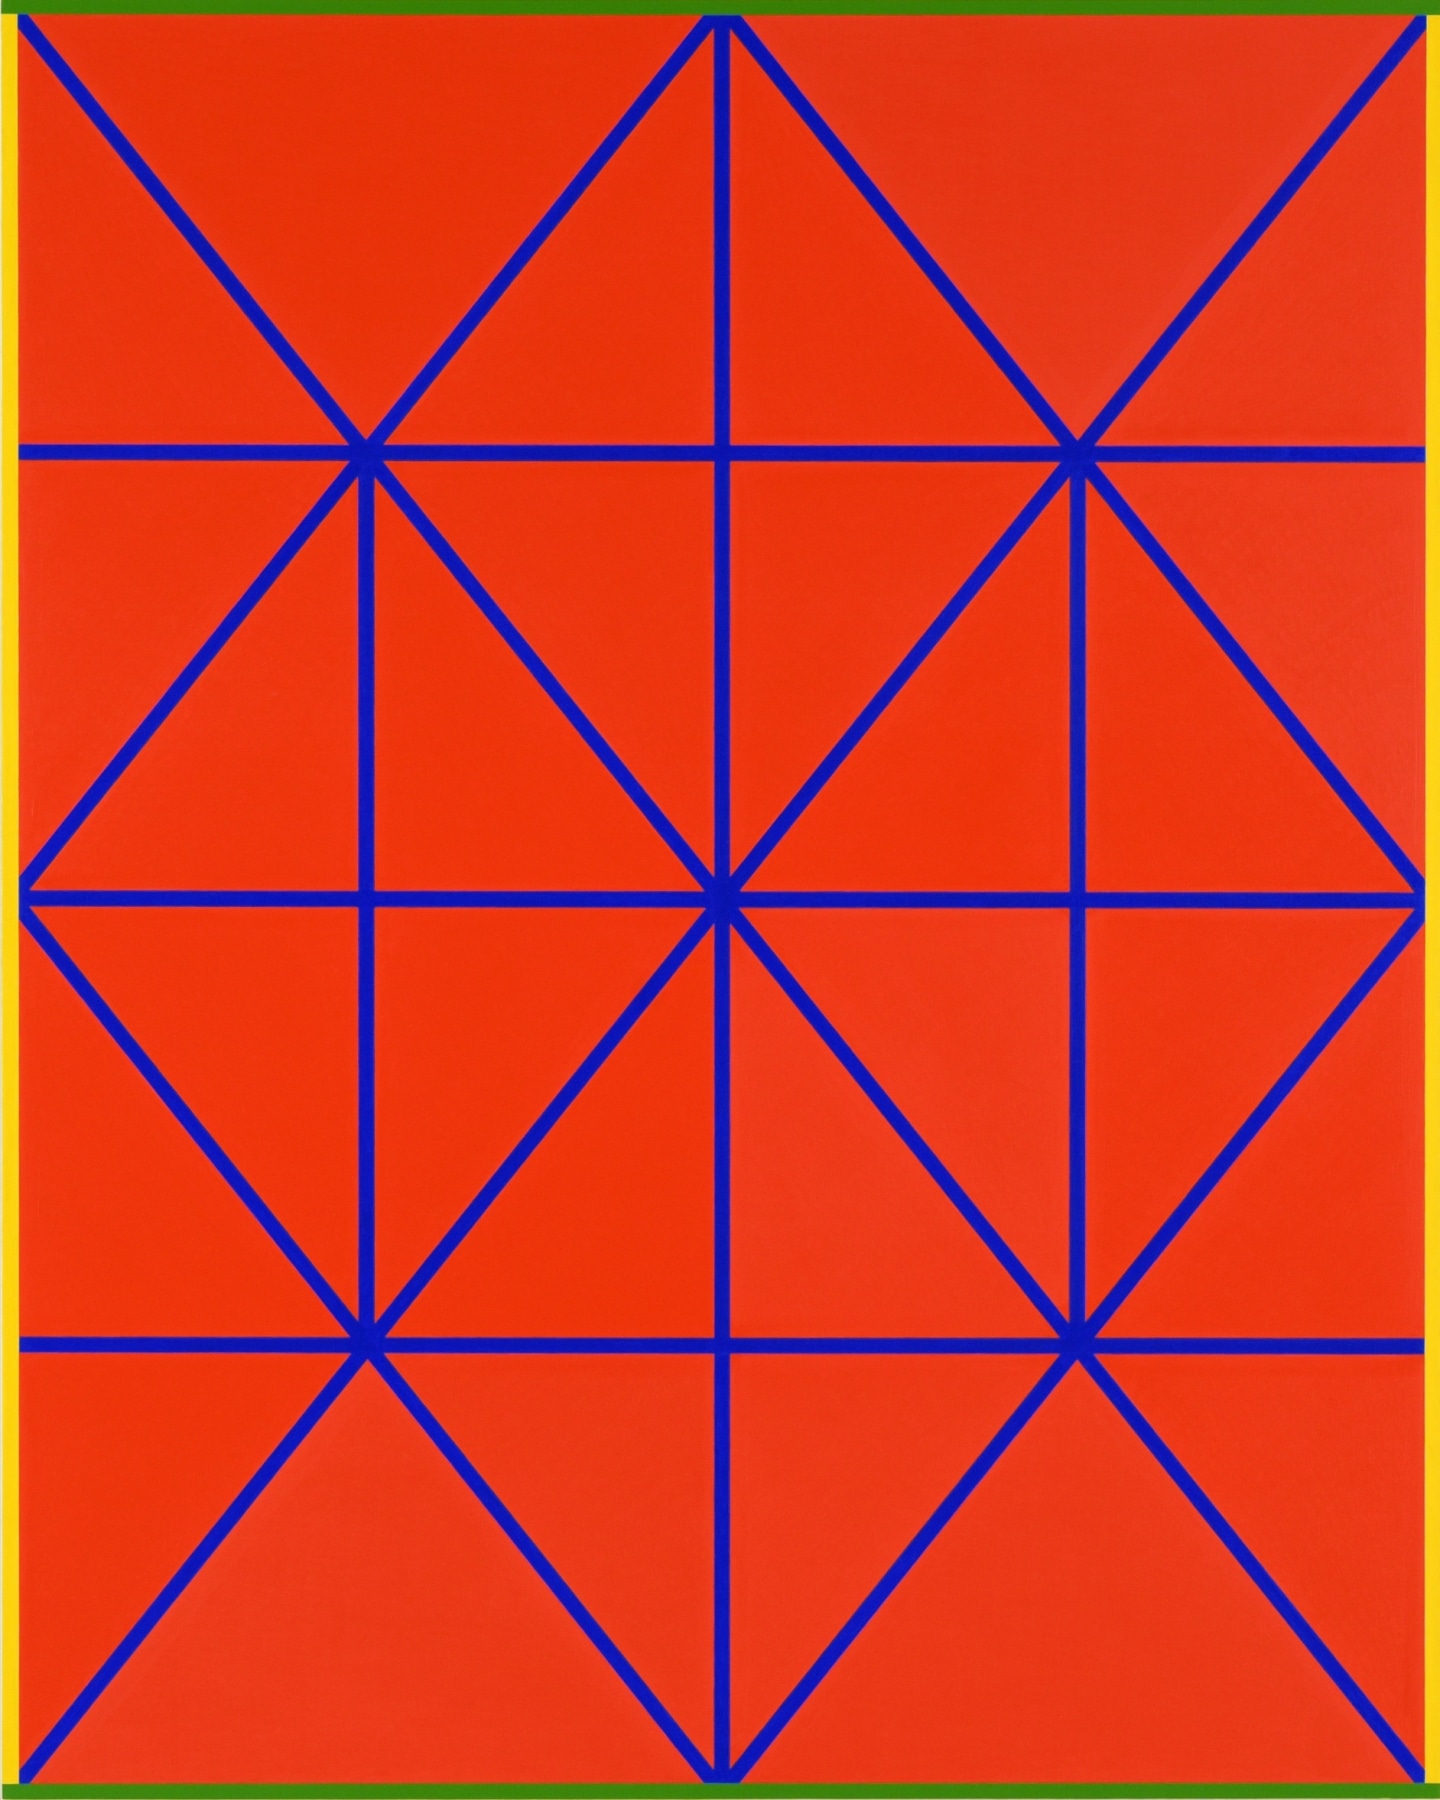 Cary Smith, Complex Diagonals #7 (red-blue with yellow-green border), 2017